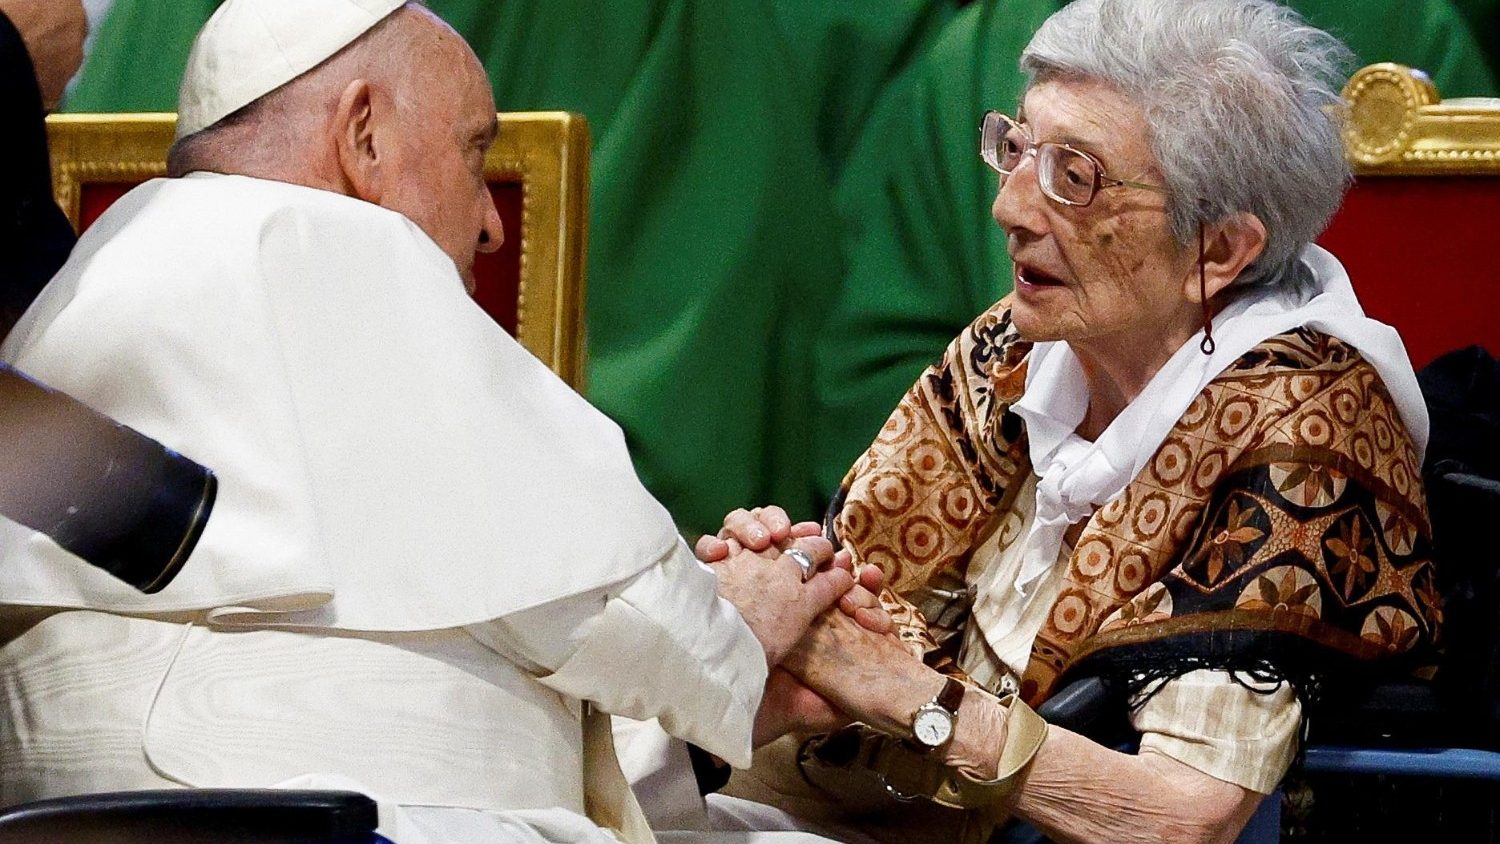 Pope: Love shared between elderly and young makes society wiser